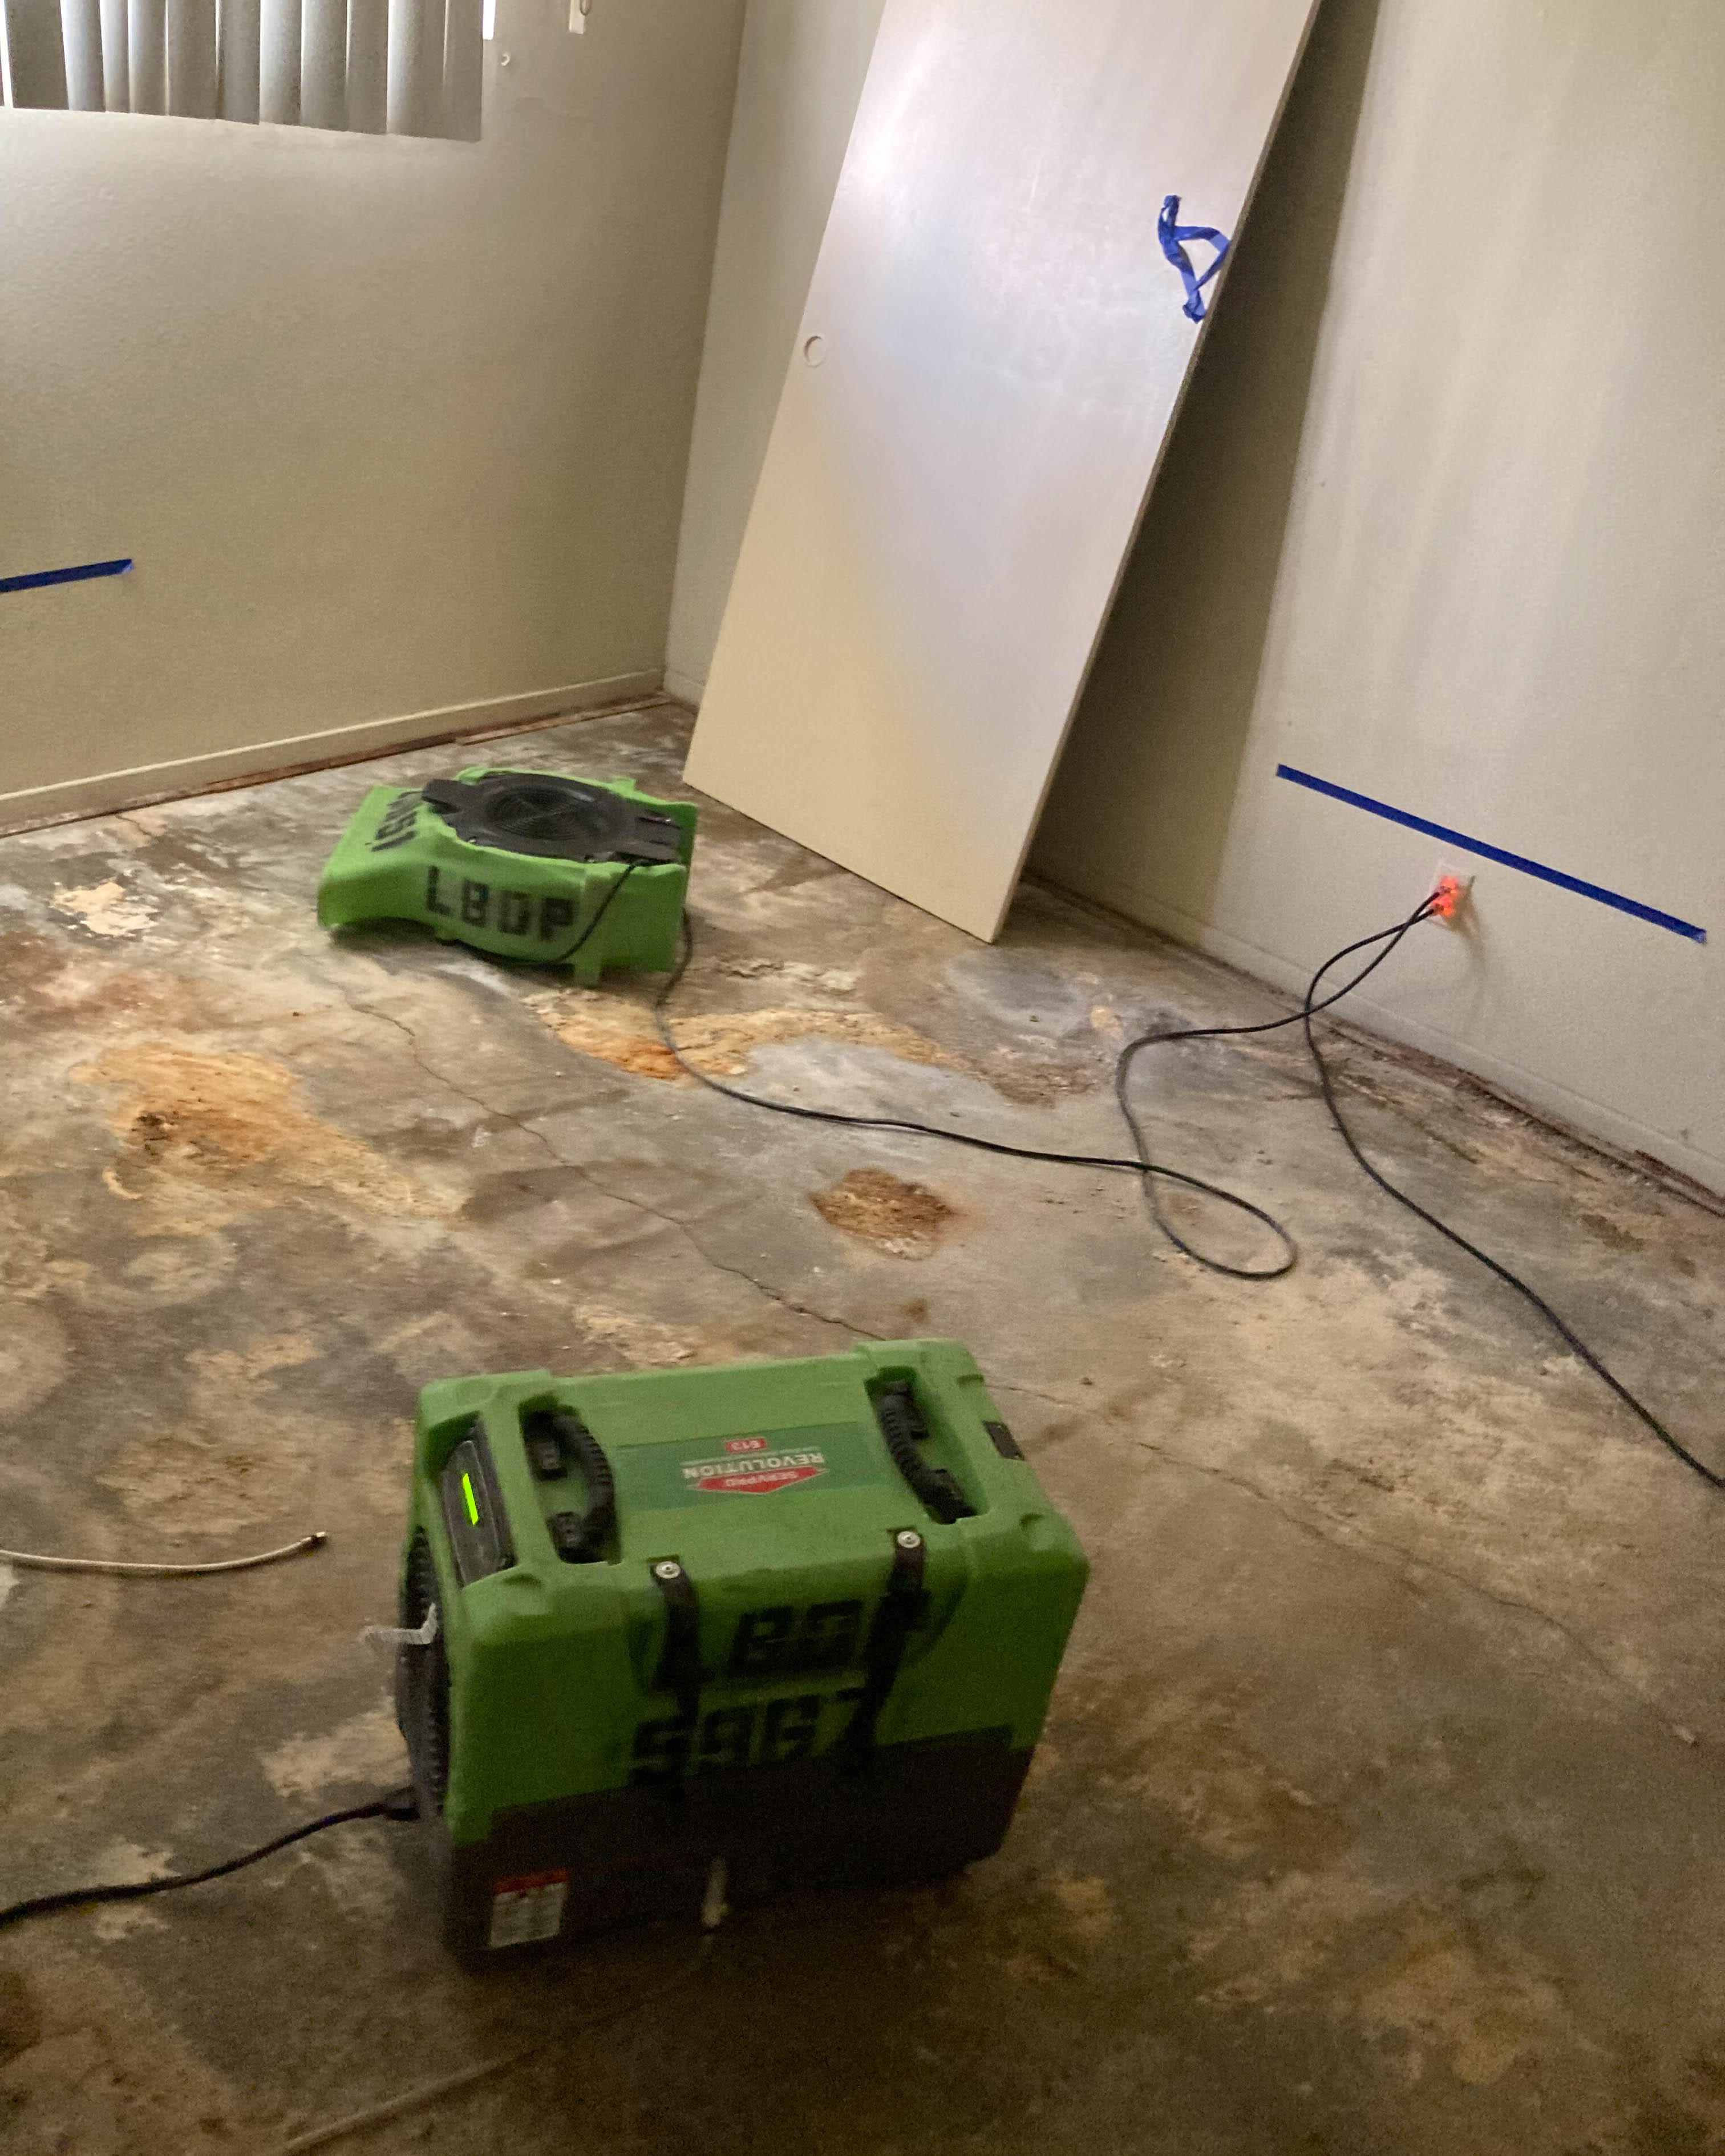 SERVPRO of Laguna Beach / Dana Point is ready to respond to your water damage restoration needs. Our team has the expertise to handle any size disaster. Our services are available 24 hours a day, 7 days a week.